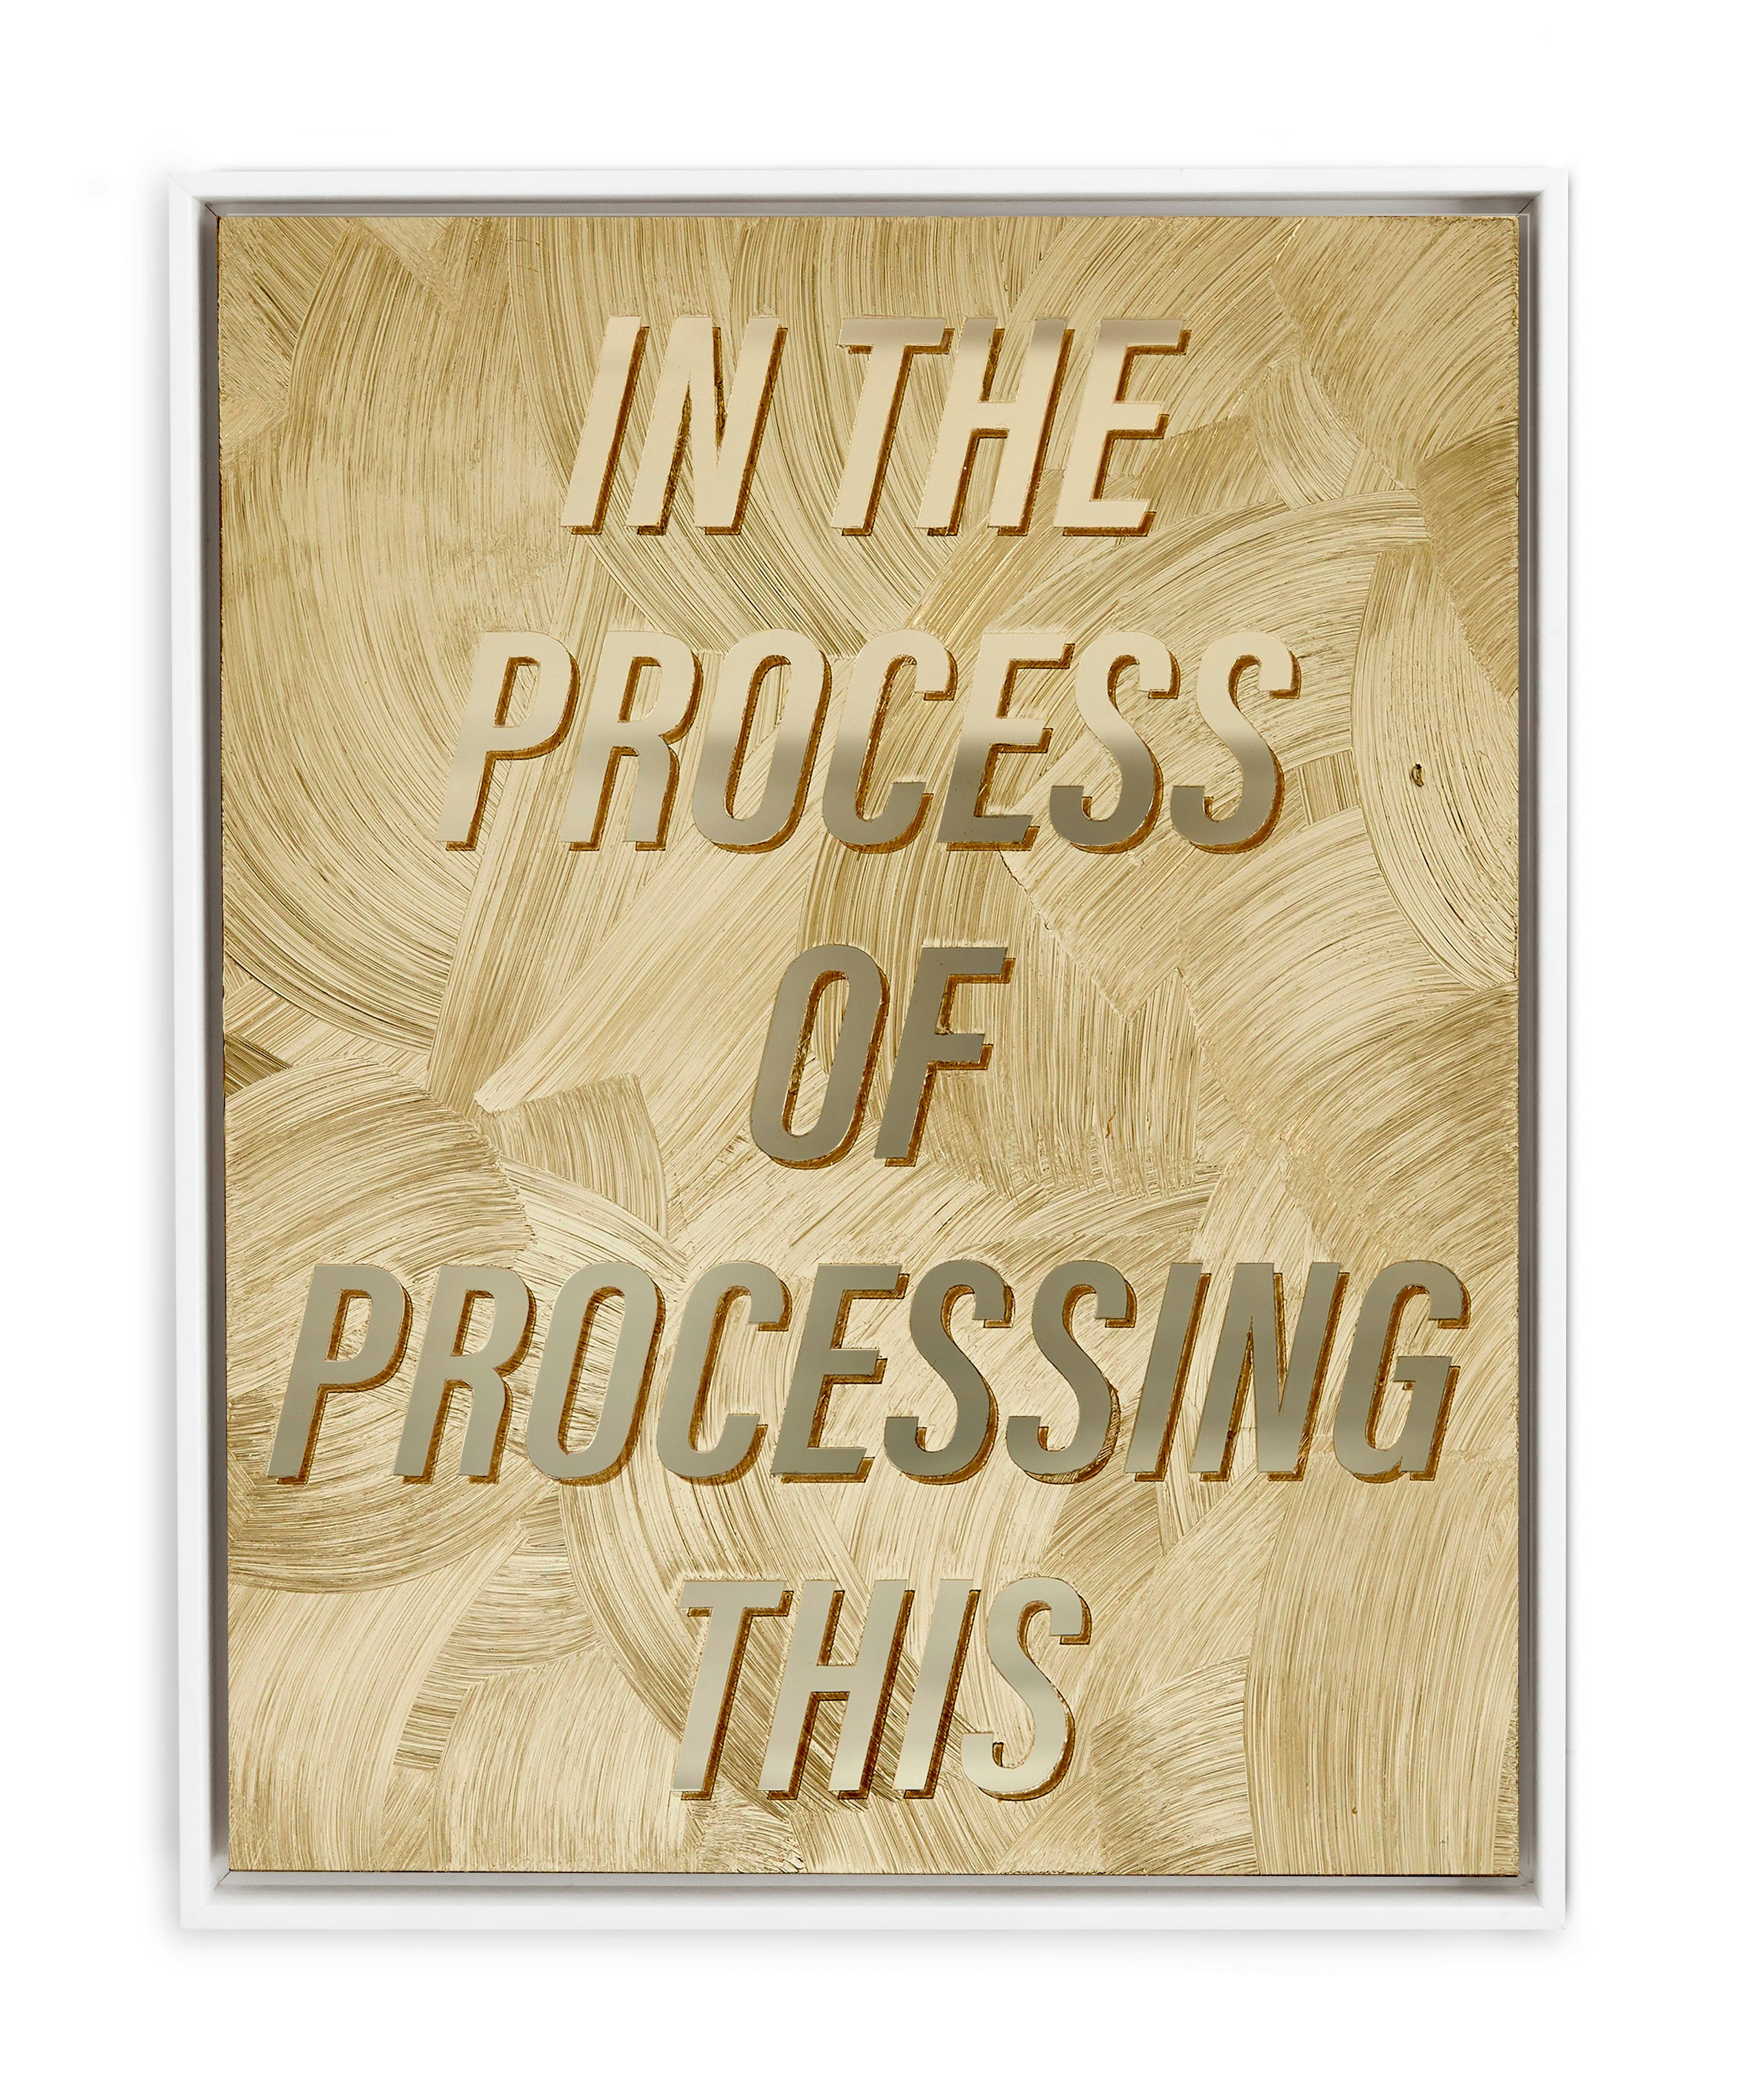 Mixed Media by Ben Skinner titled "In The Process Of".